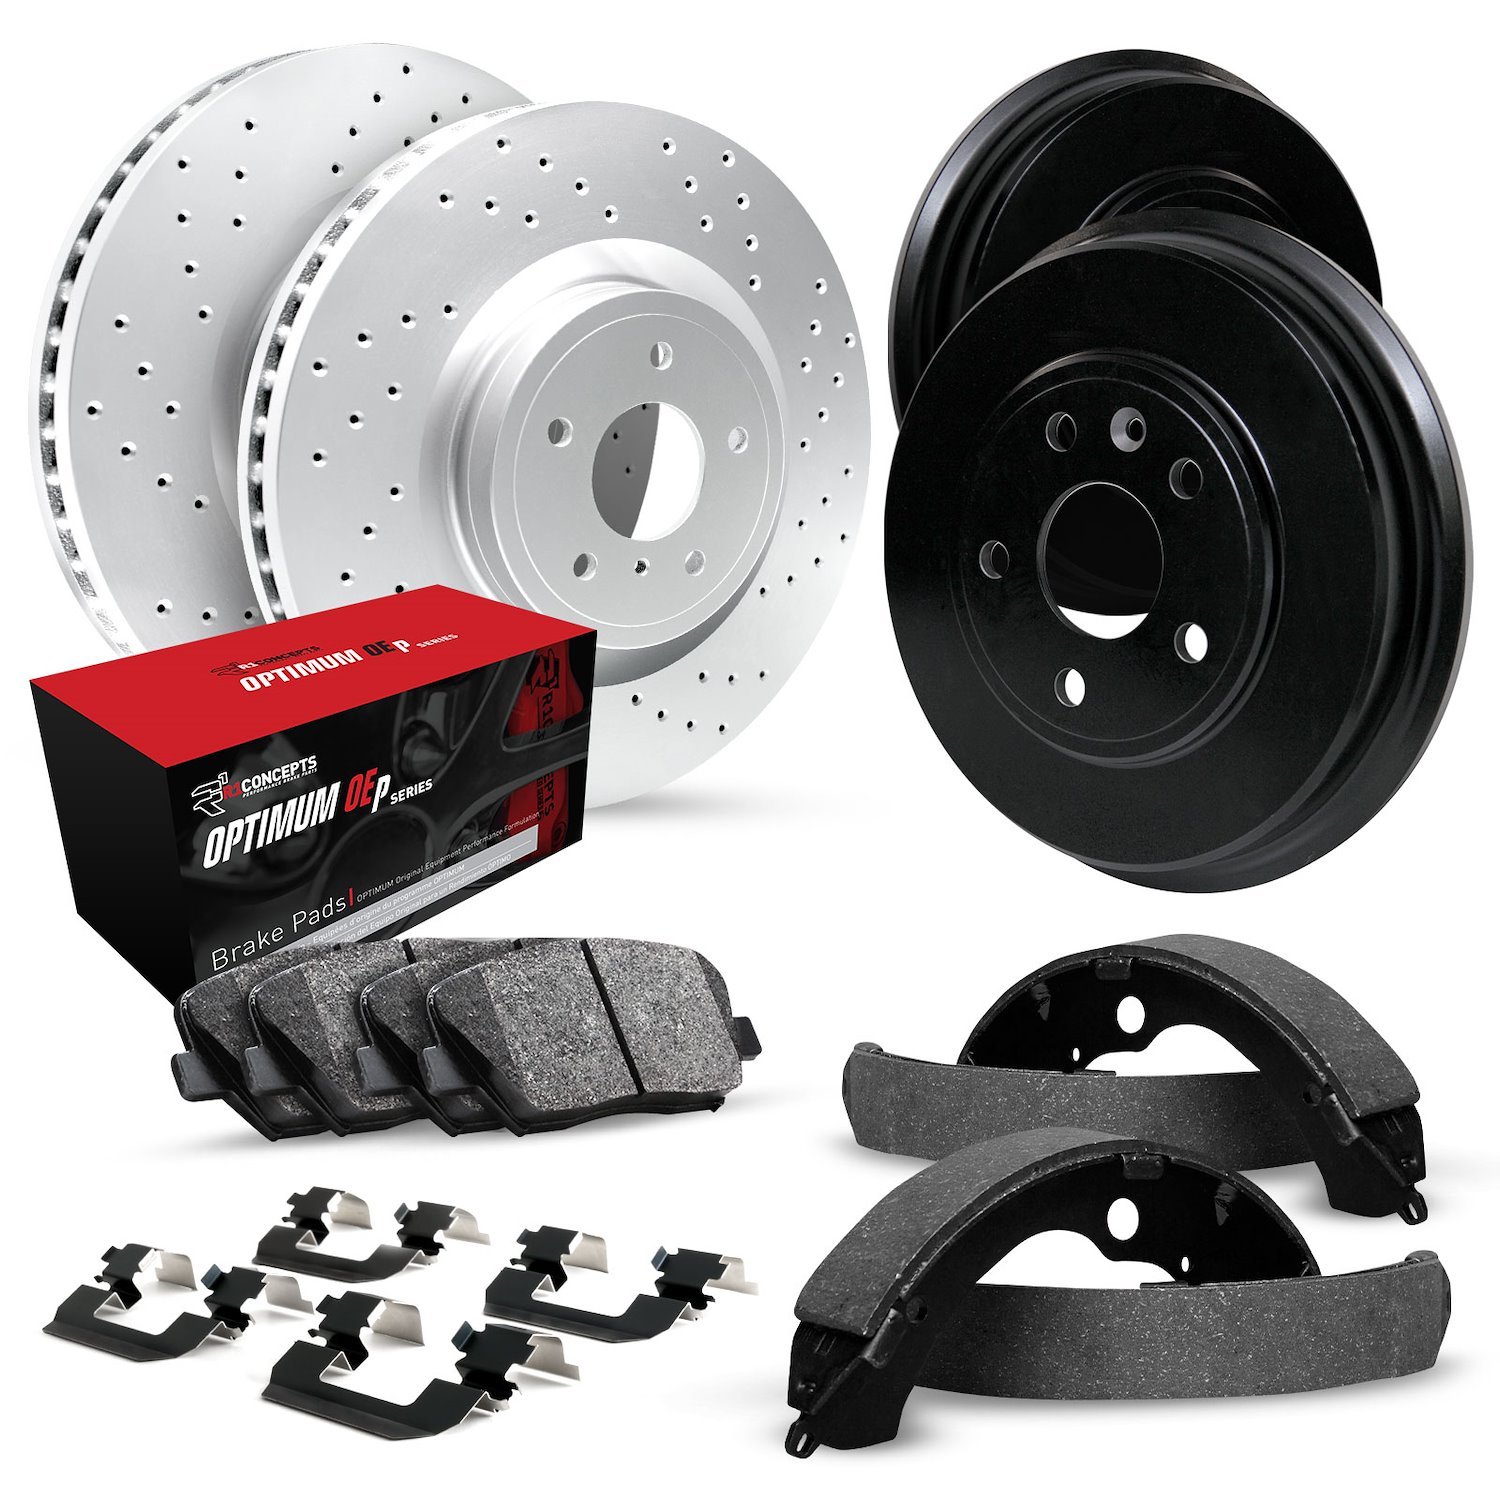 GEO-Carbon Drilled Brake Rotor & Drum Set w/Optimum OE Pads, Shoes, & Hardware, 2001-2002 GM, Position: Front & Rear